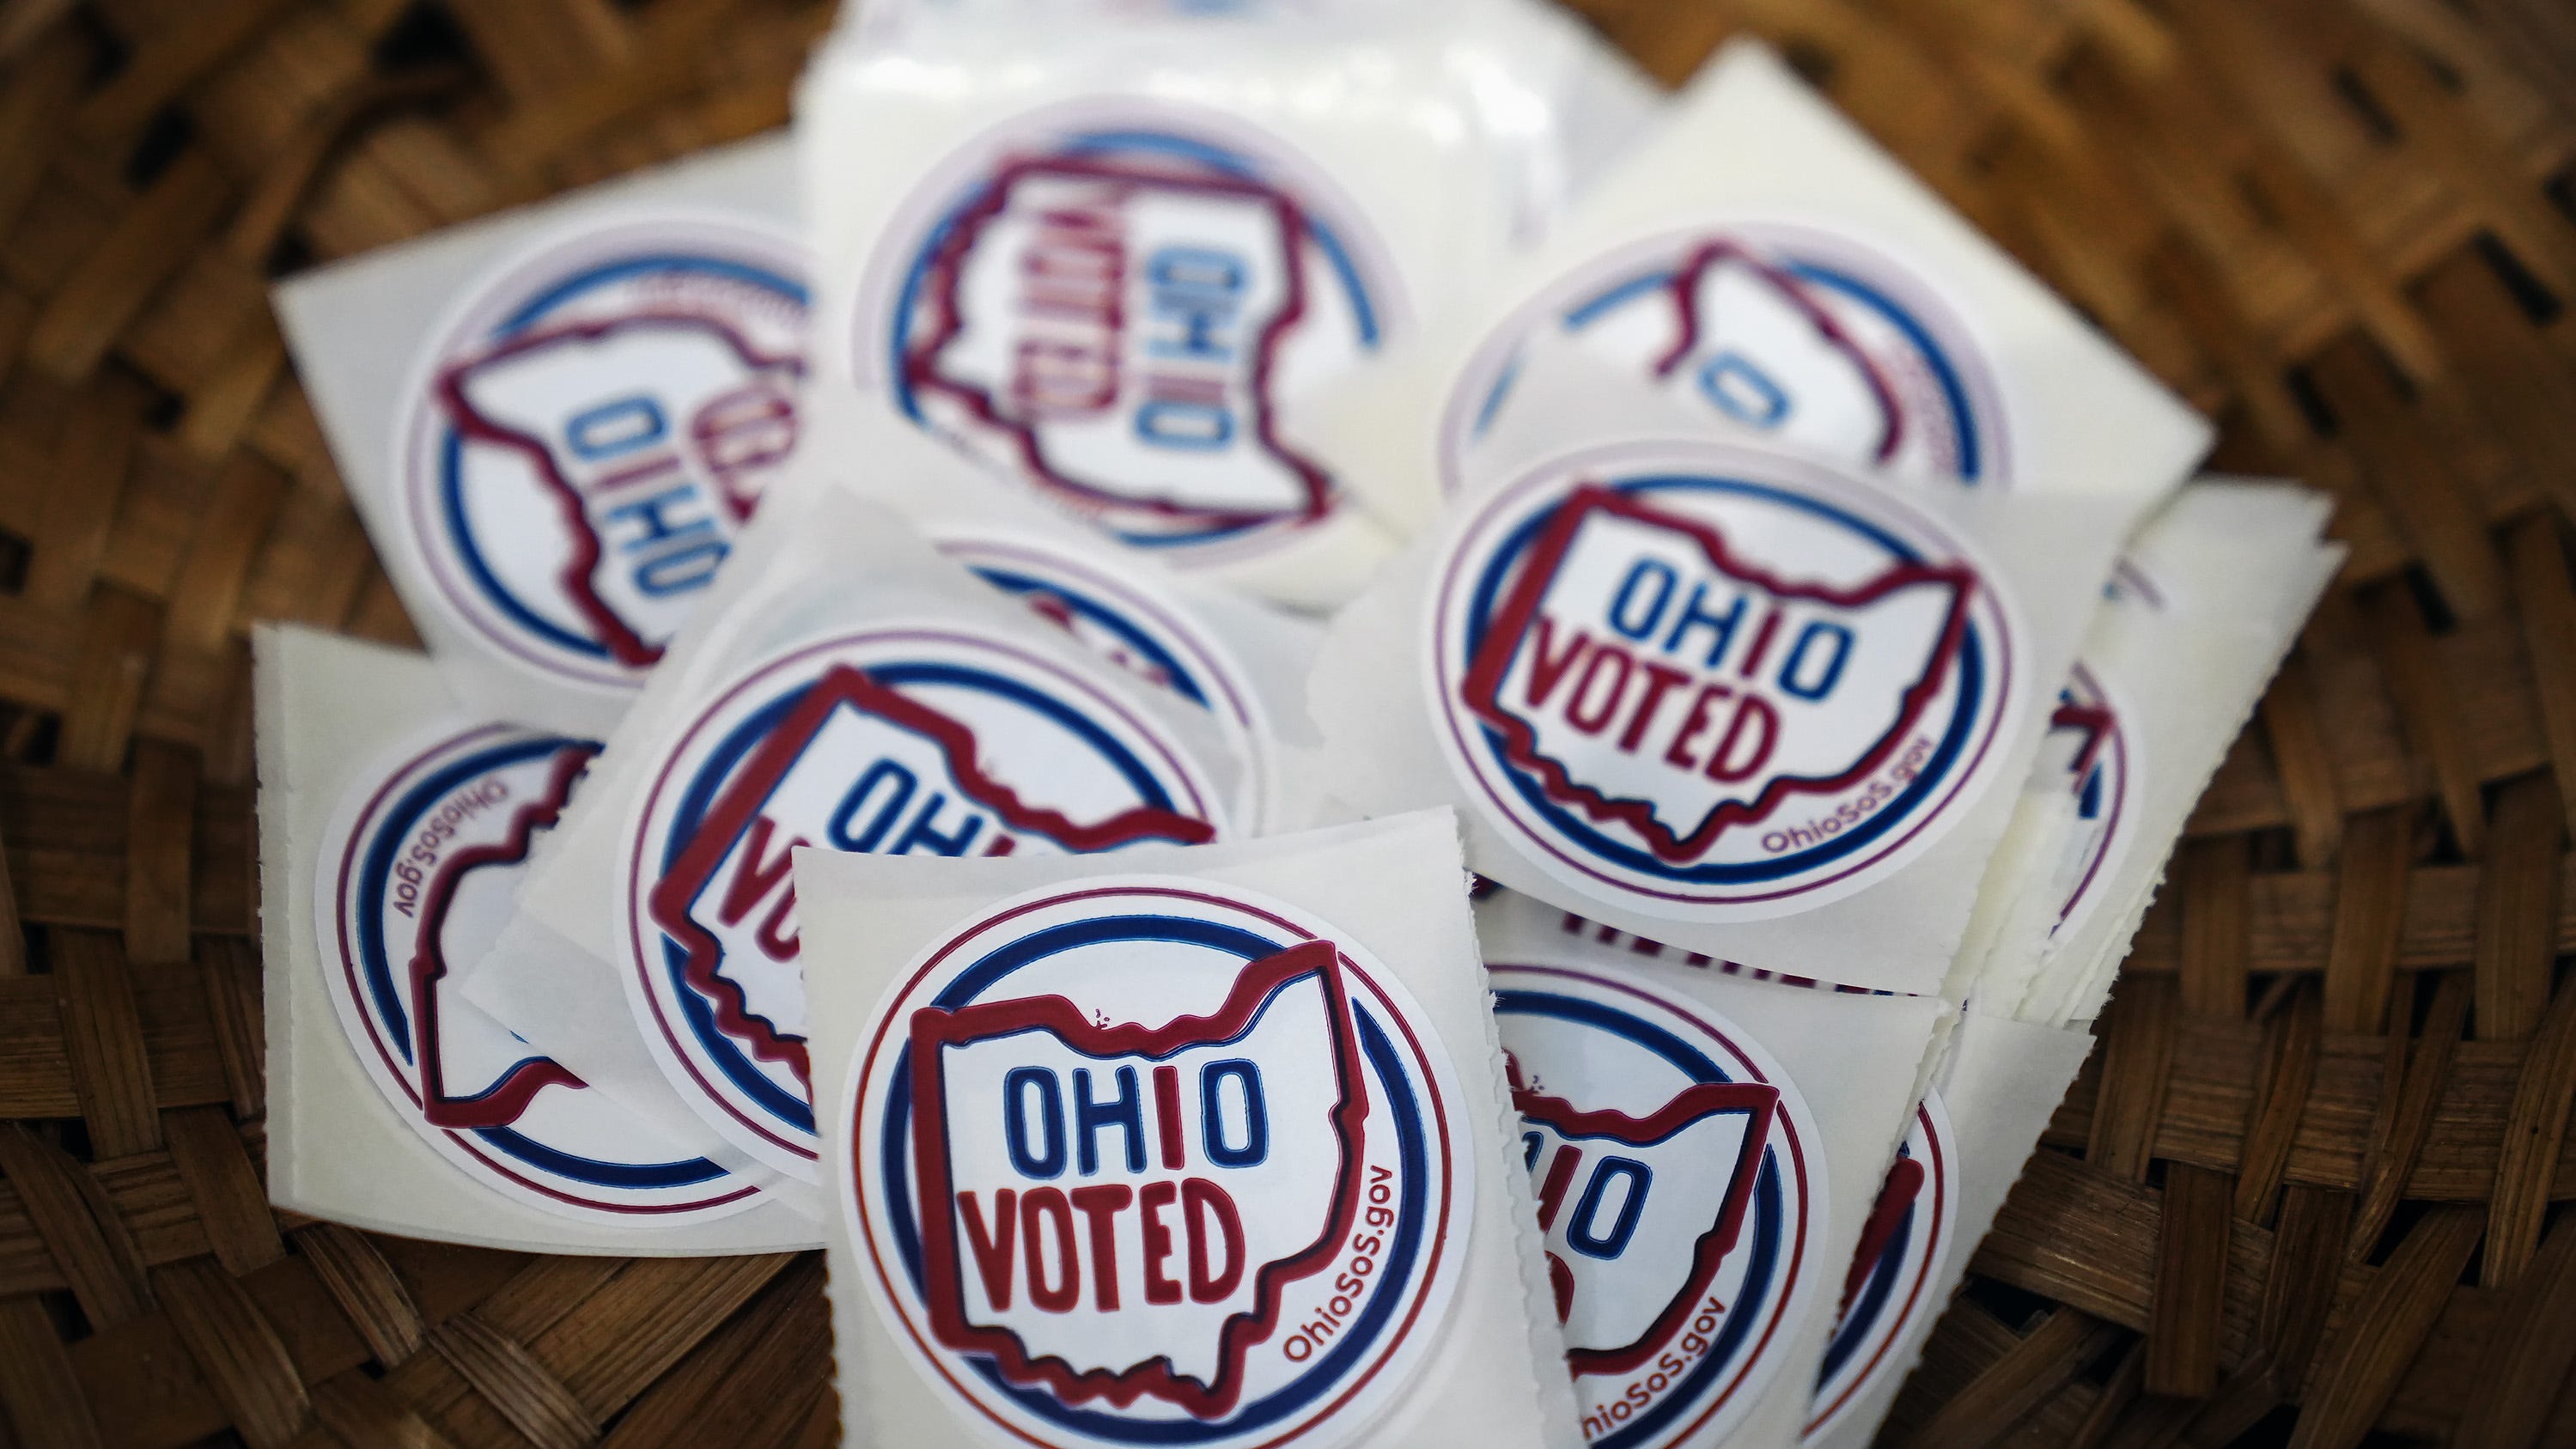 Minimum wage issue will not be on the ballot in Ohio in November